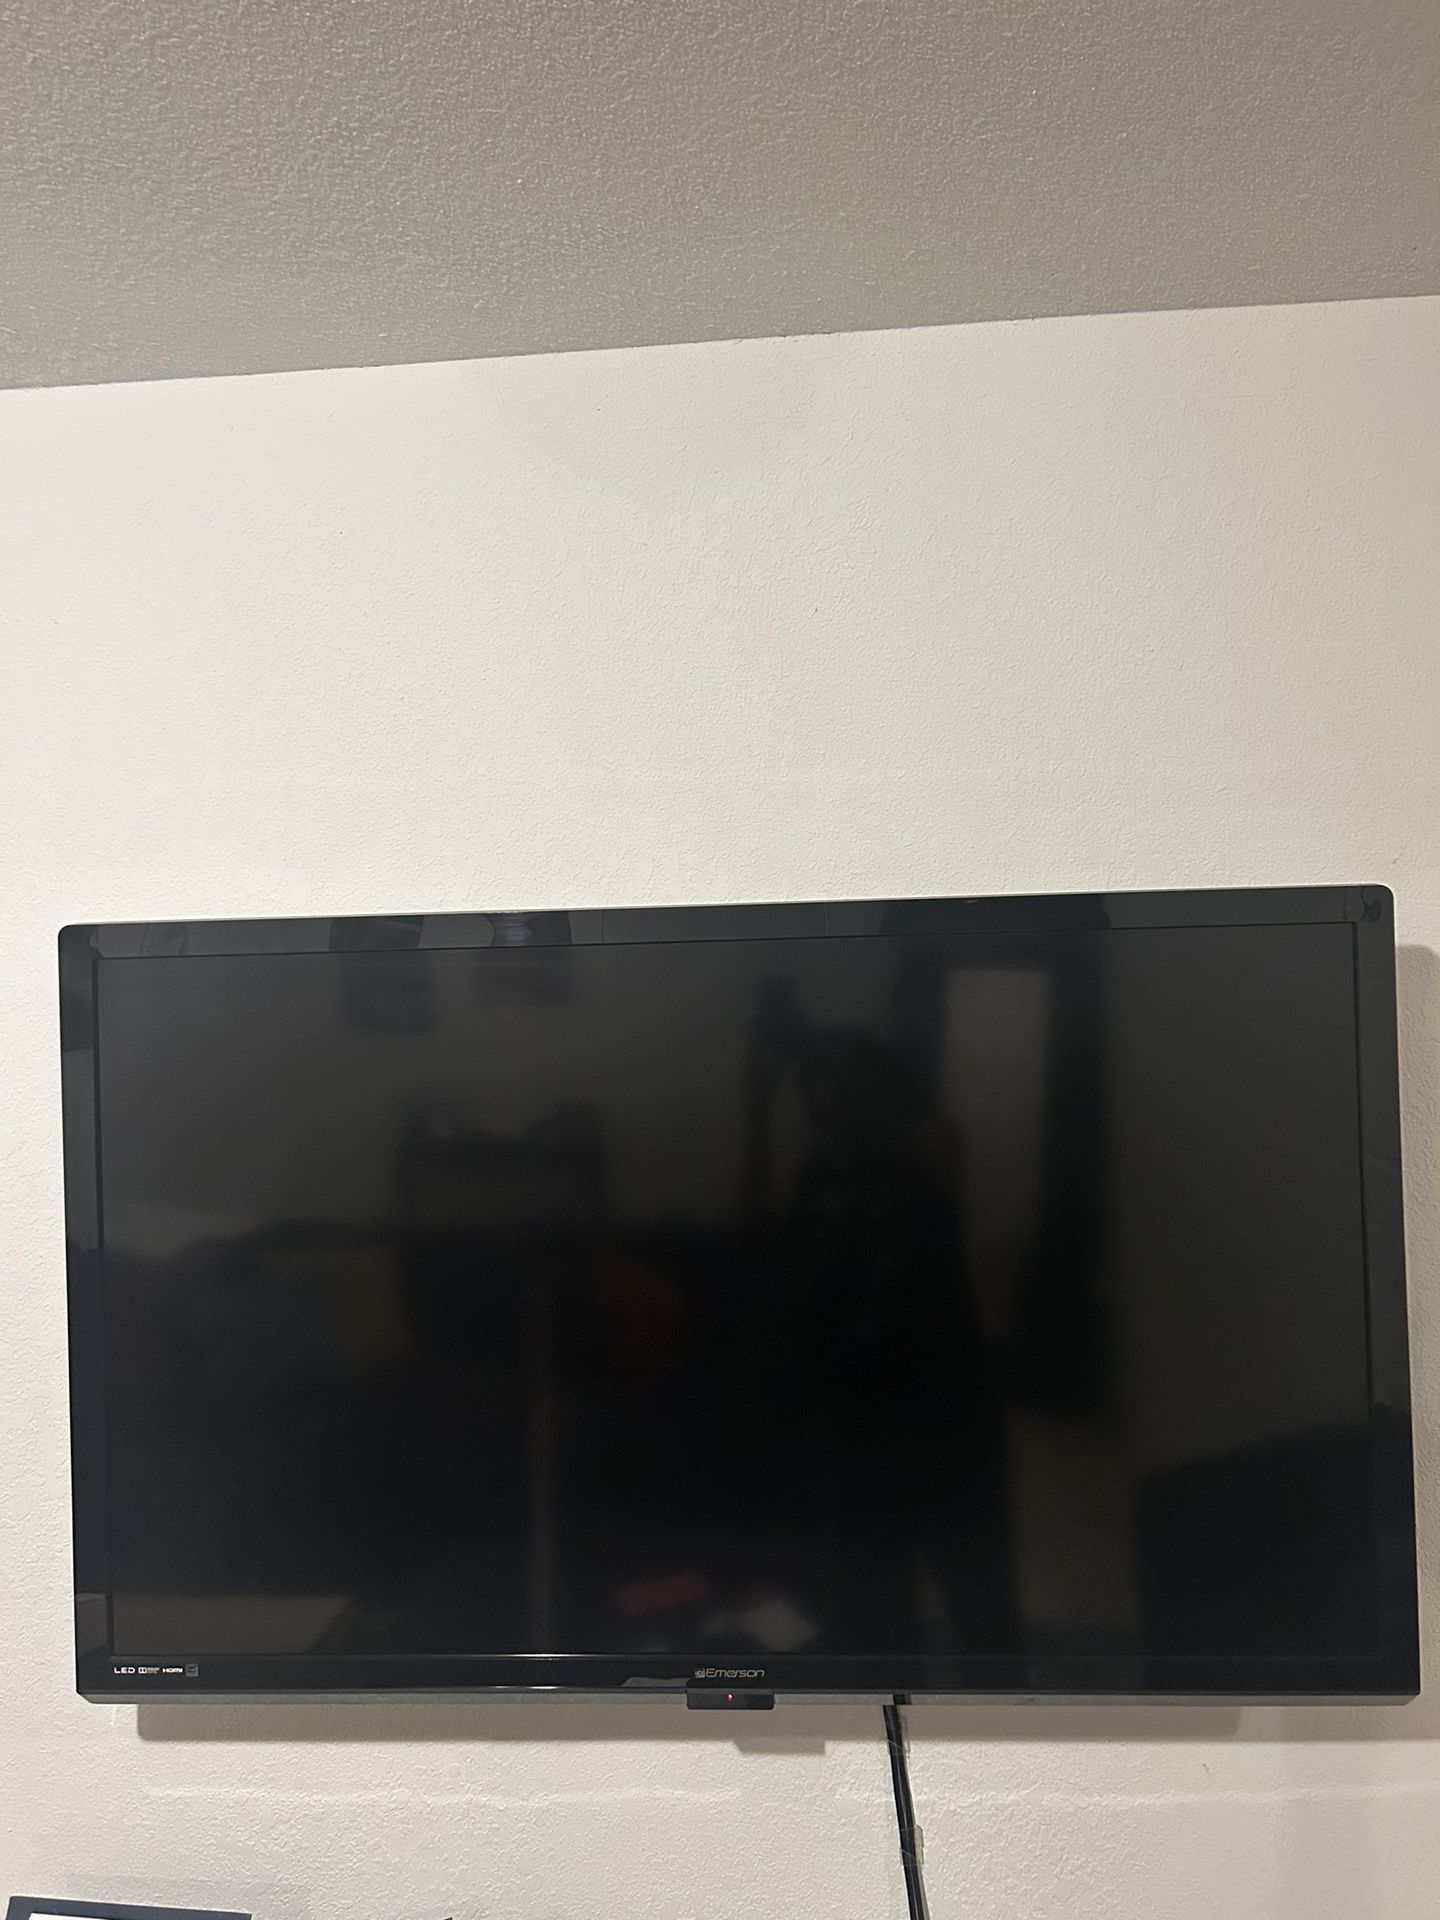 50 inch Emerson Tv For Sale